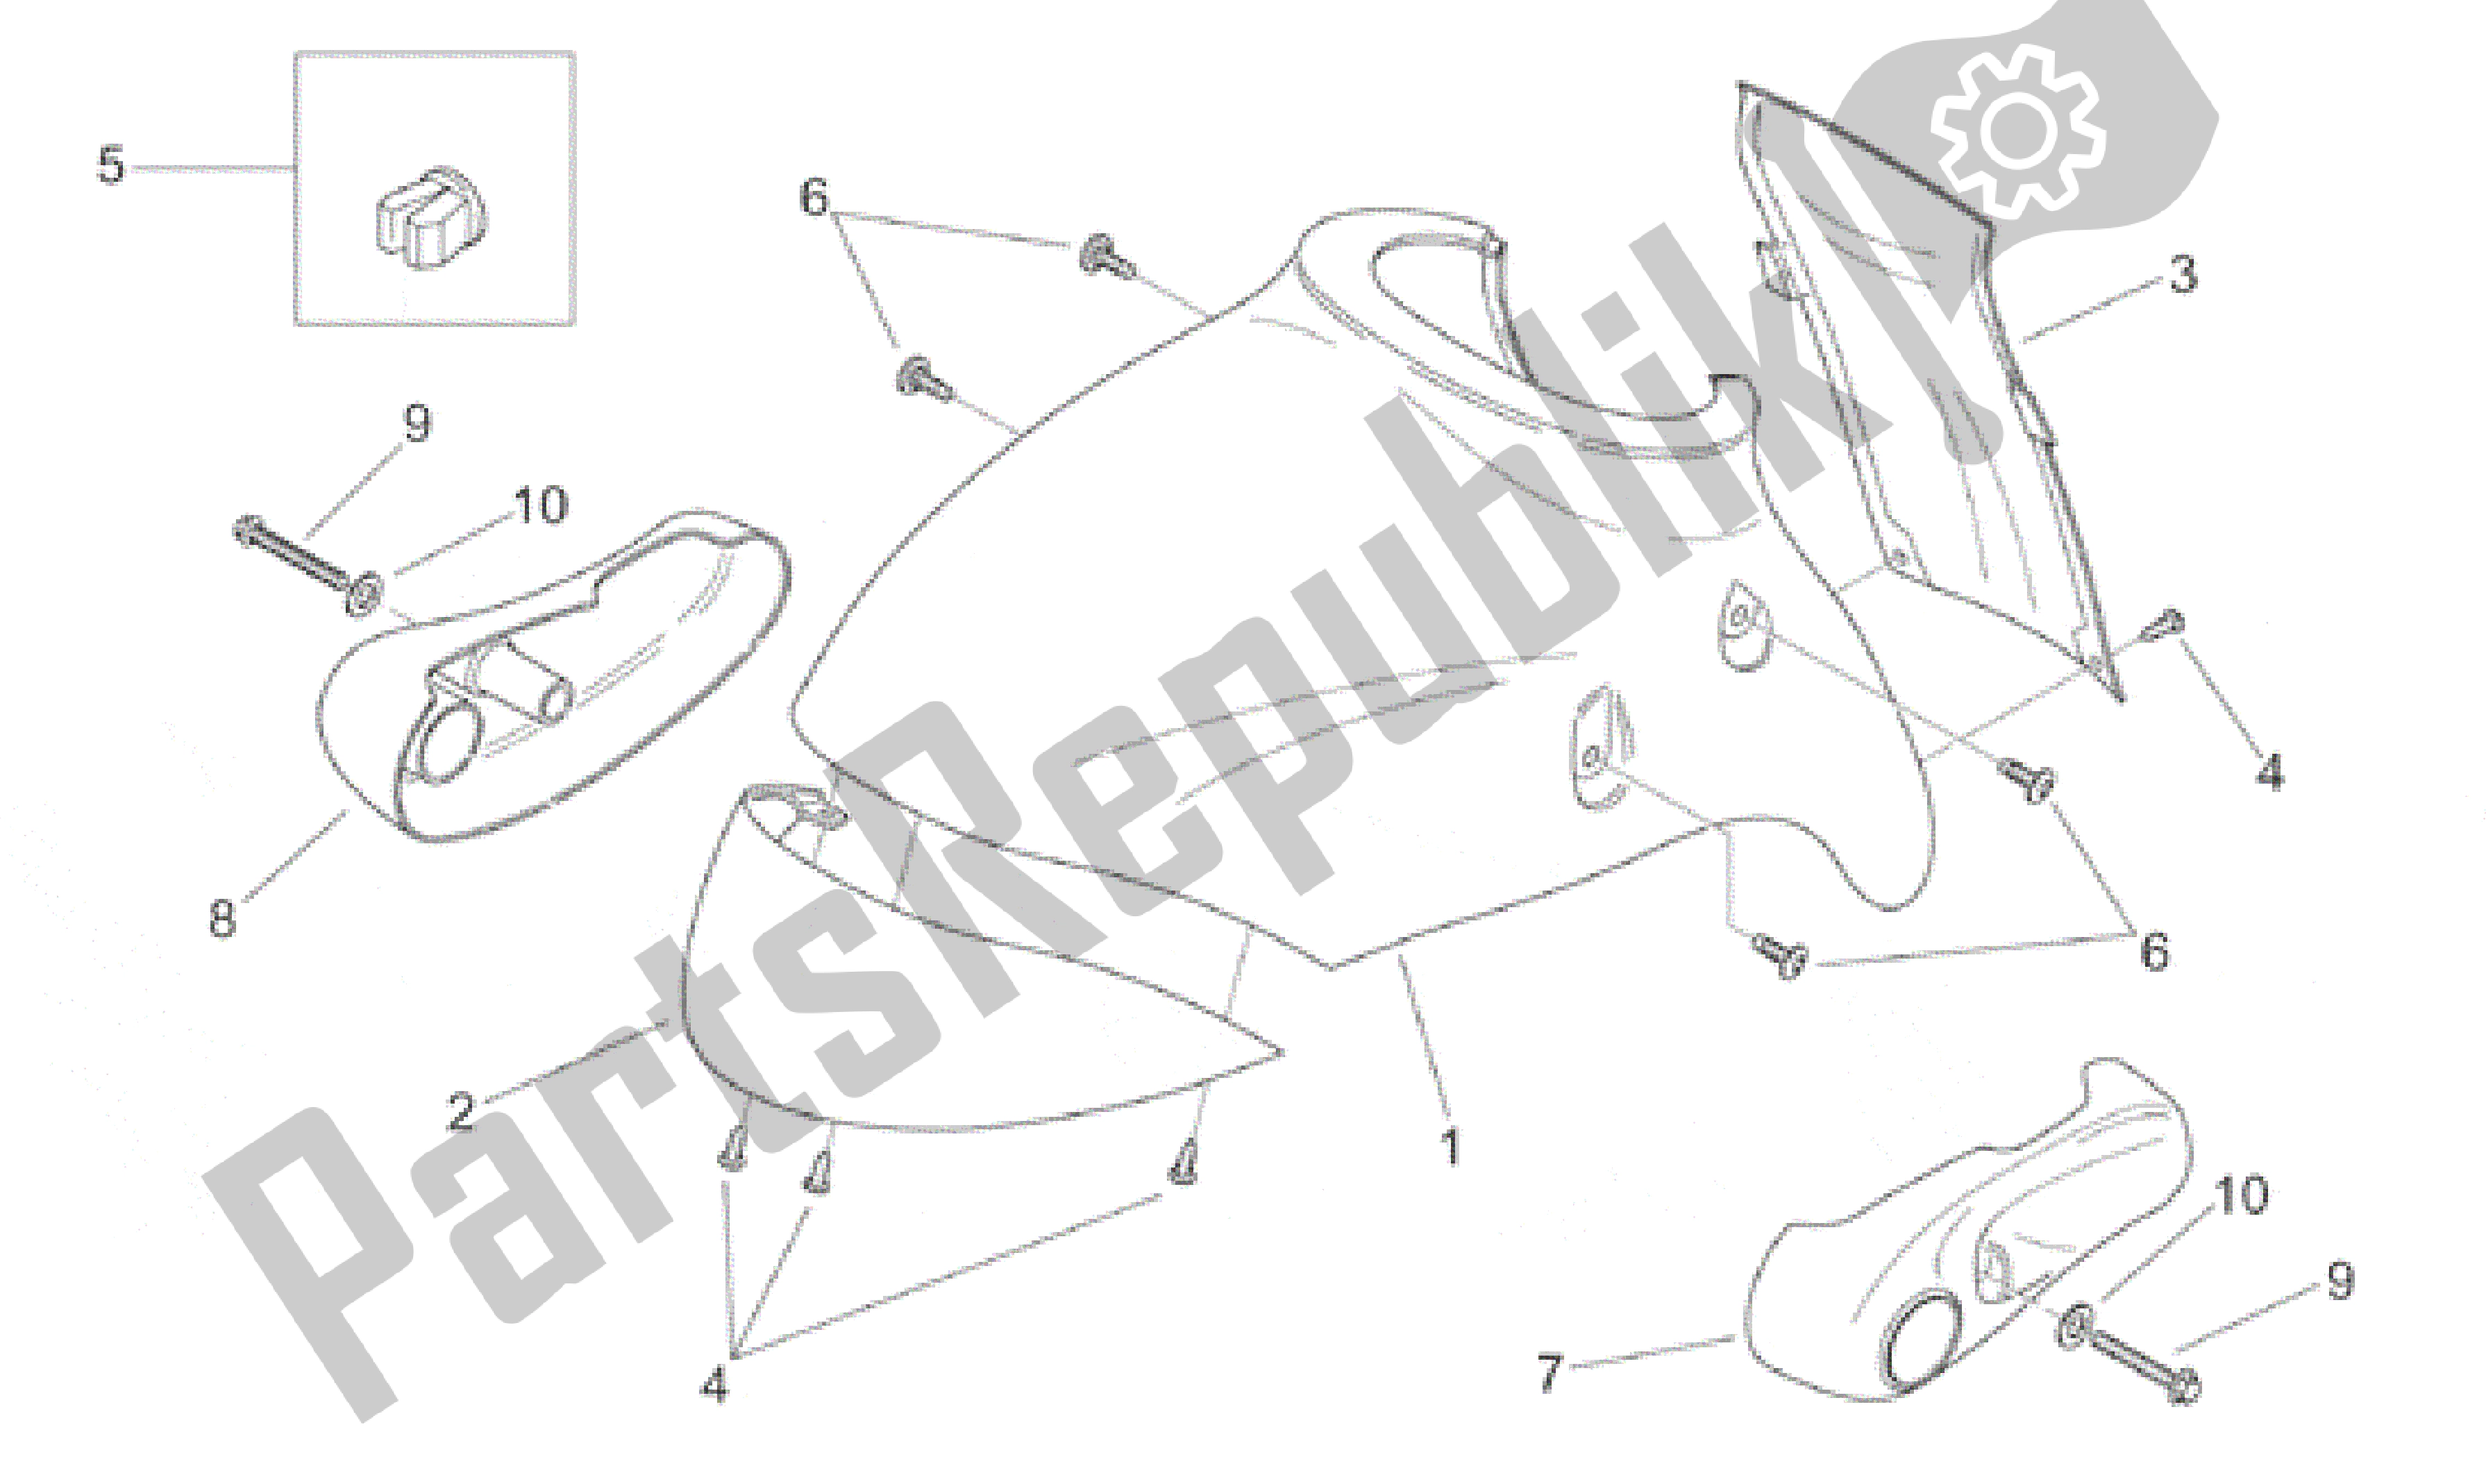 All parts for the Front Body - Front Mudguard of the Aprilia Habana 125 1999 - 2001